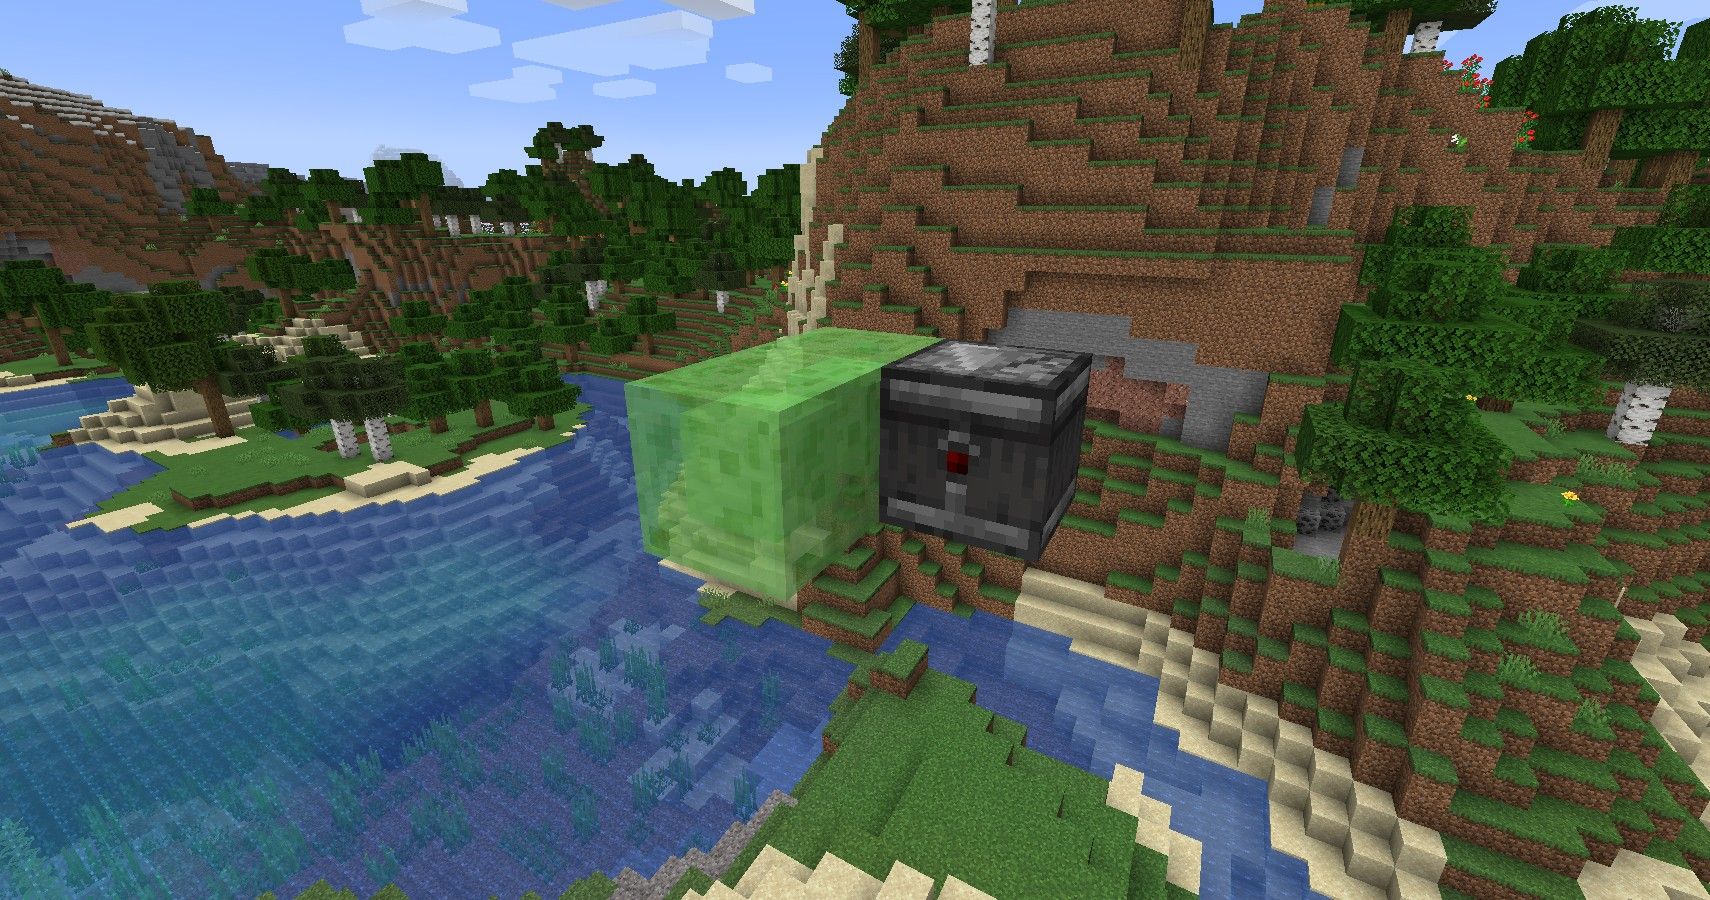 slime and observer of minecraft flying machine